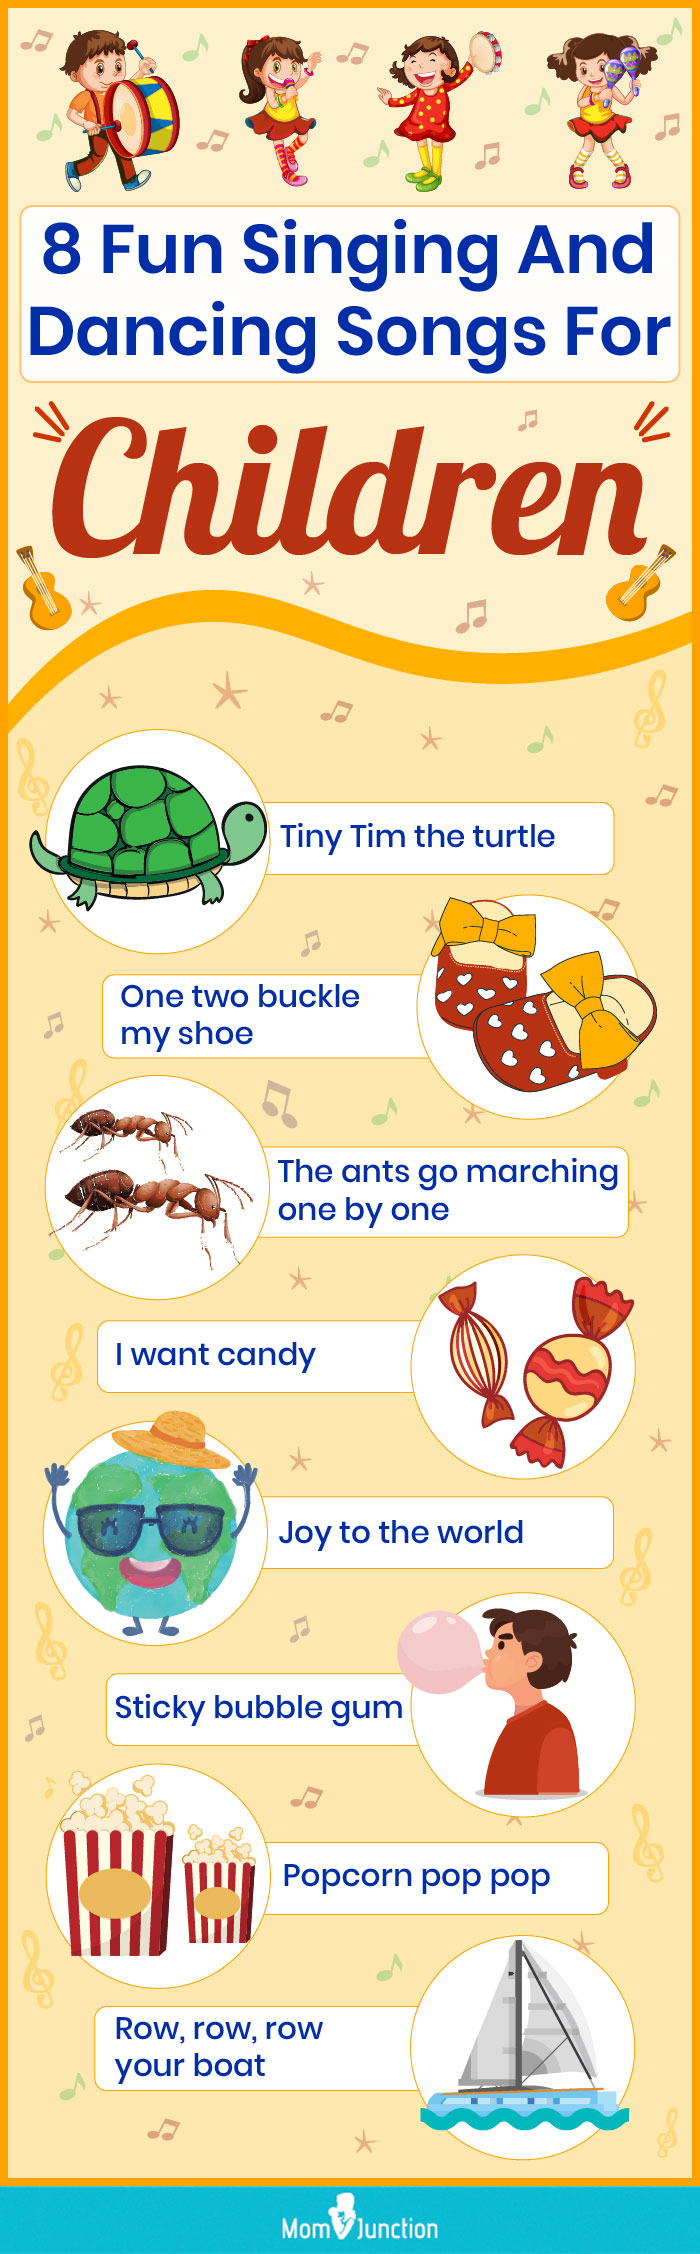 8 fun singing and dancing songs for children (infographic)